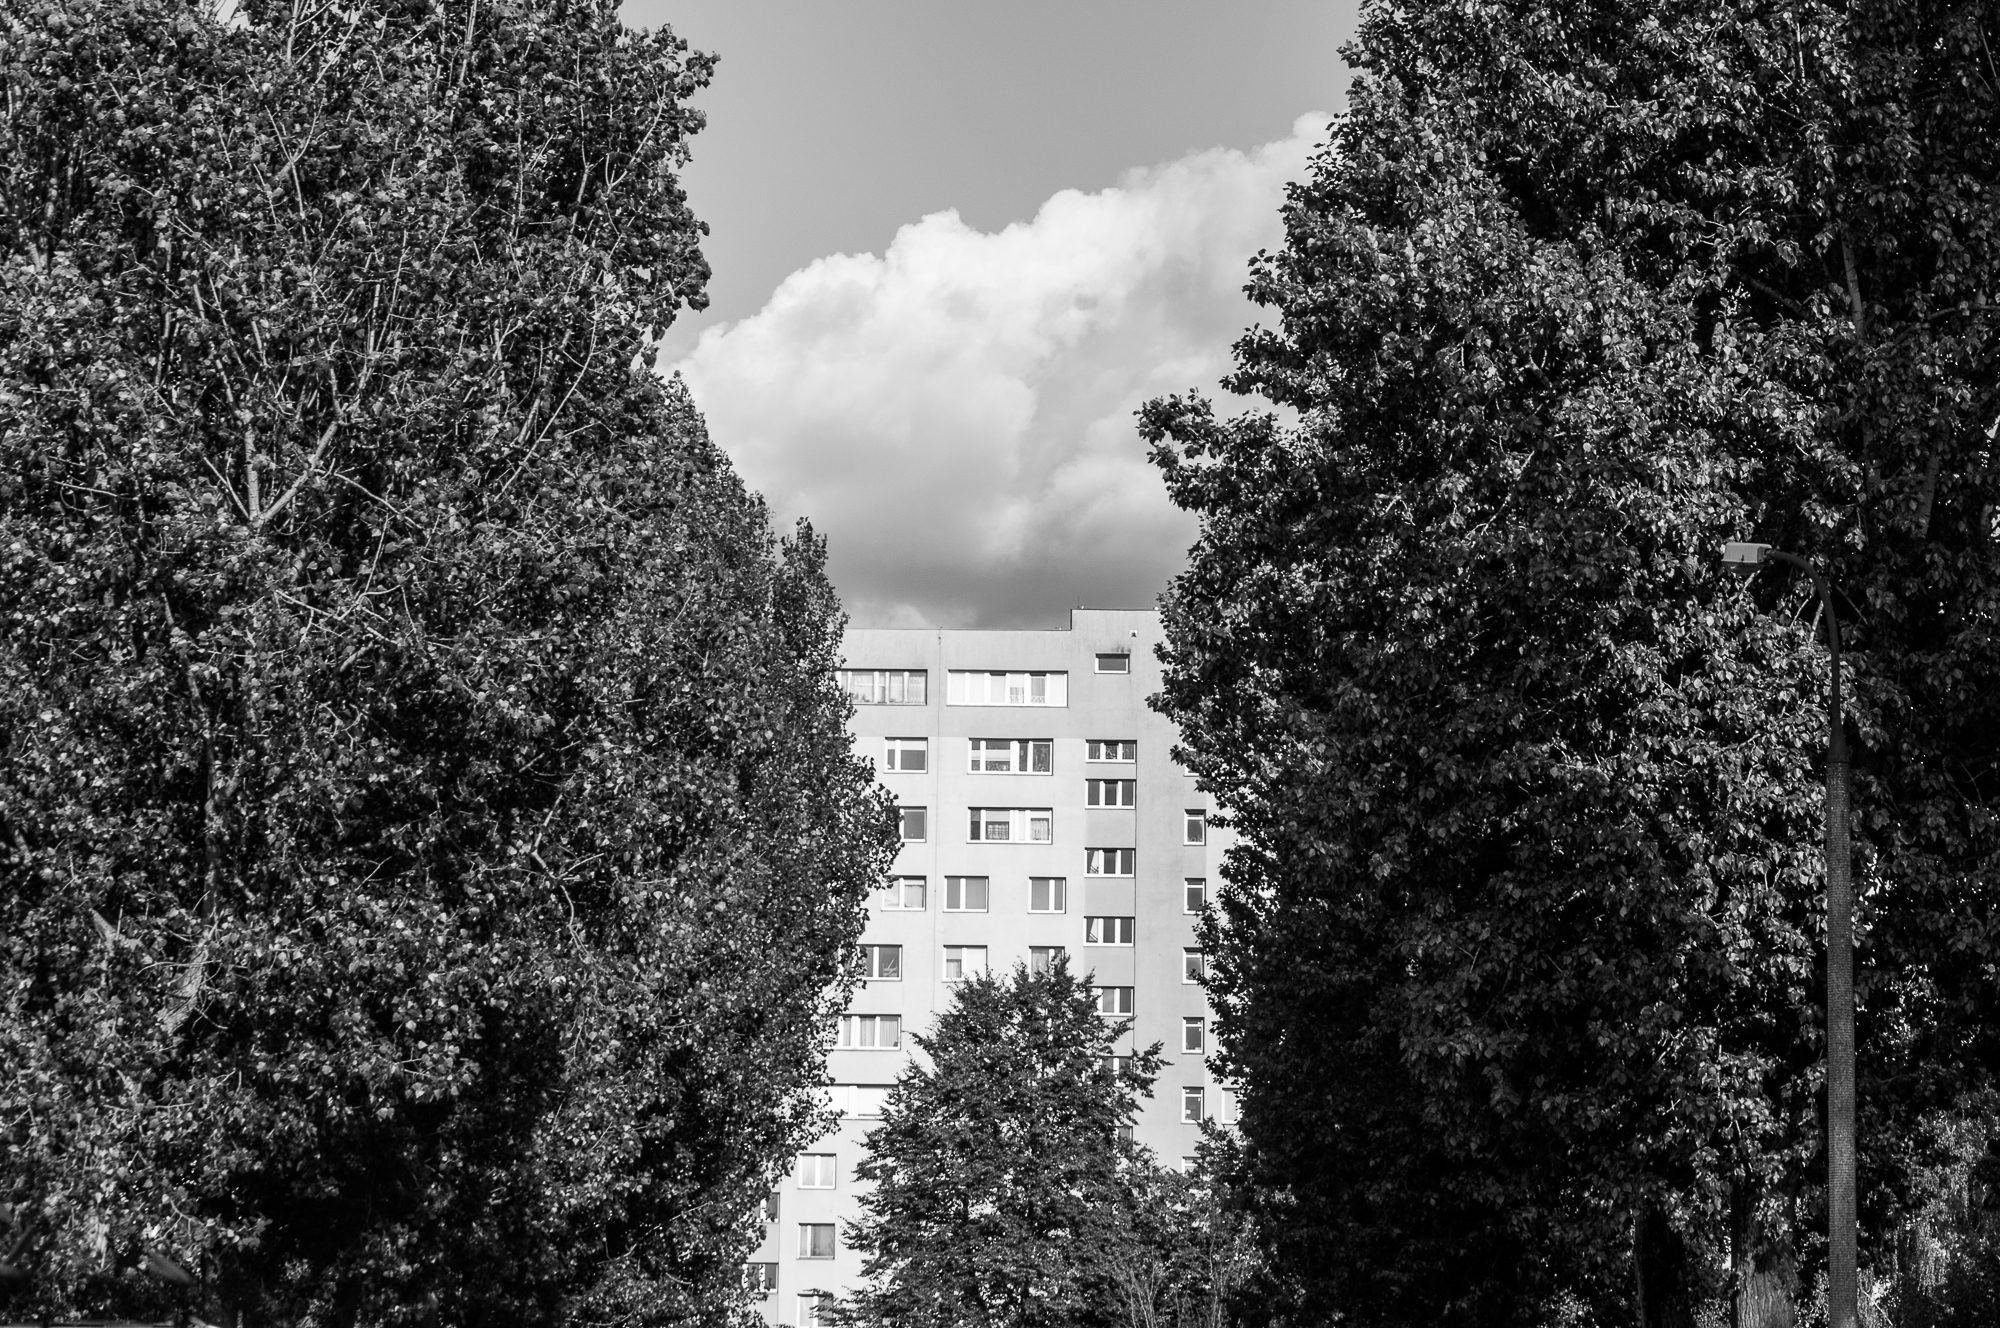 Adam Mazek Photography 2022. Warsaw Street Photography. Post: "Quantity over quality?" Minimalism. Living in Poland.